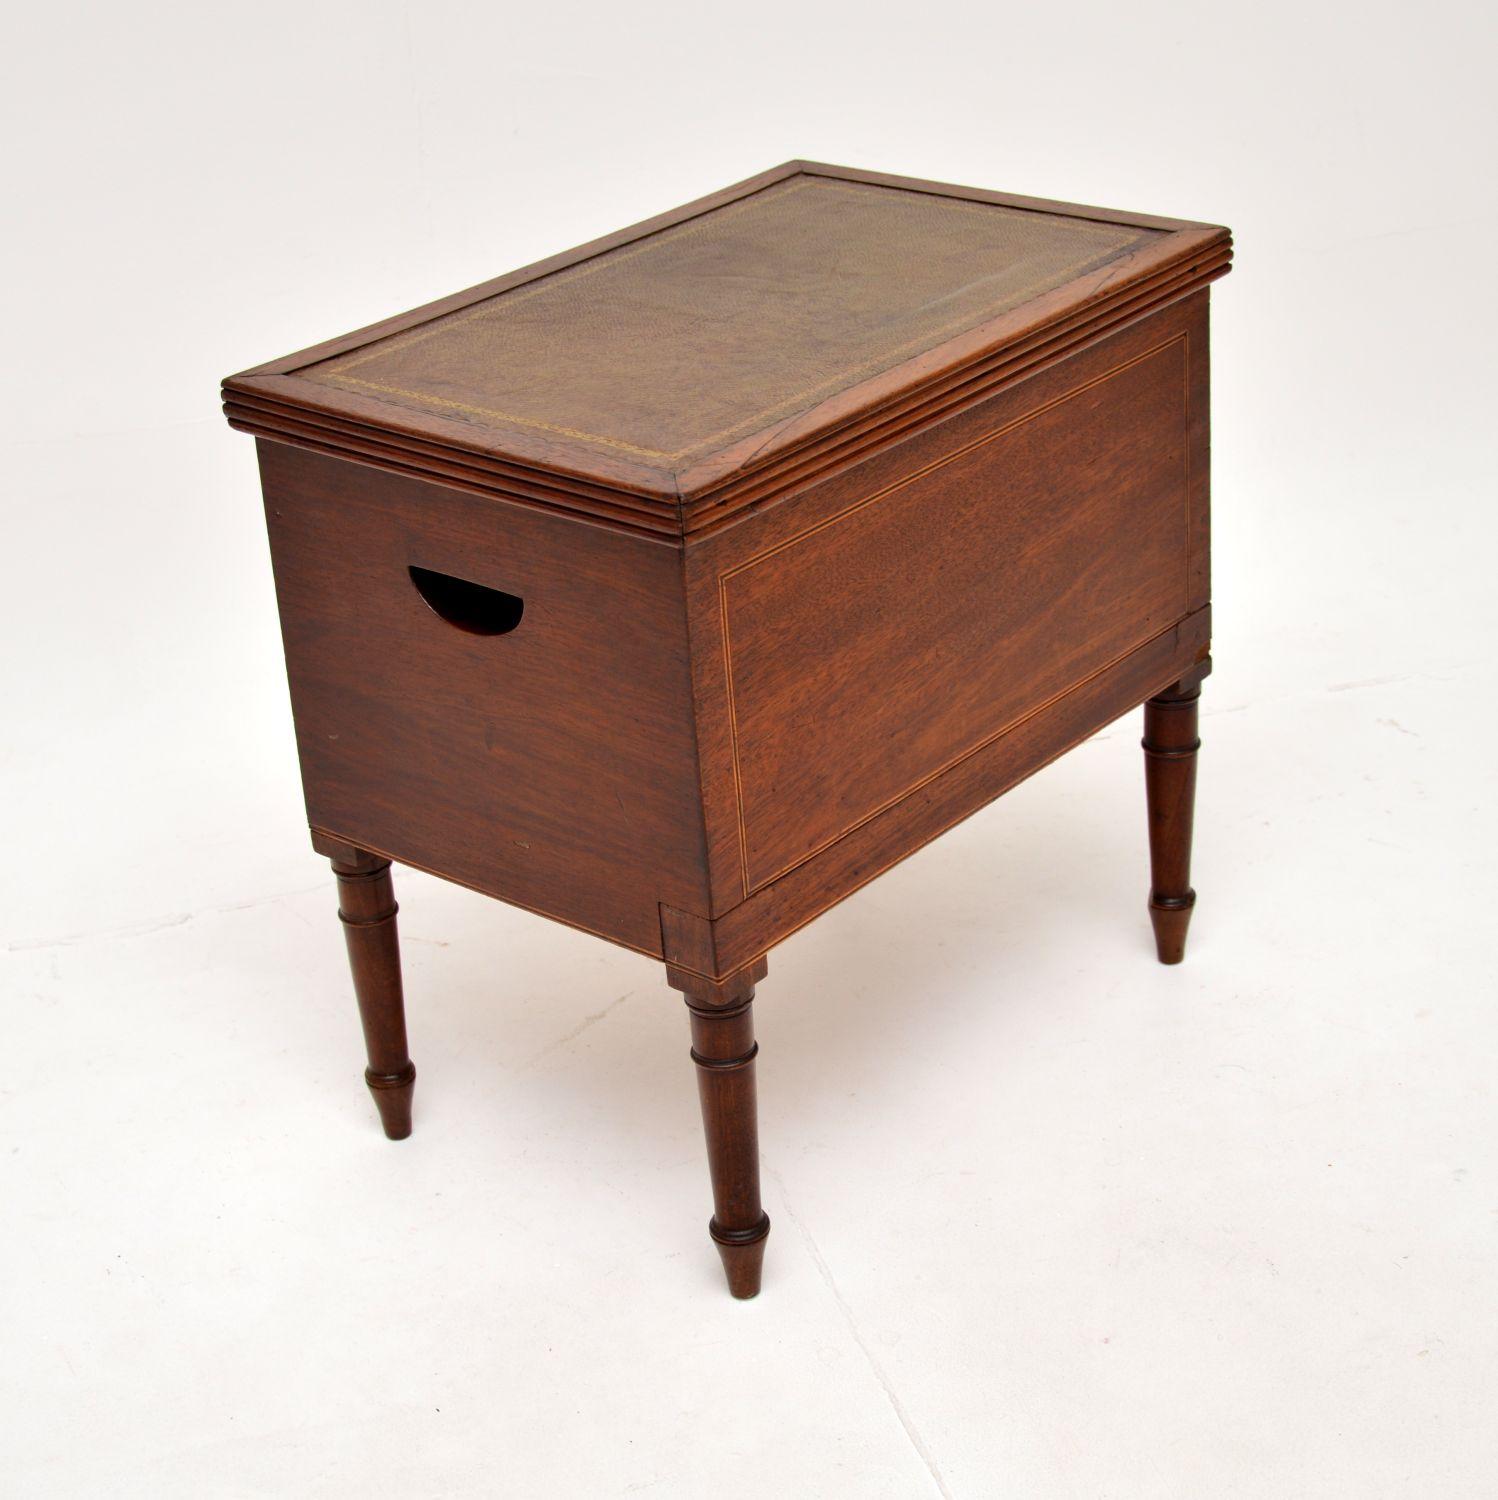 Early 19th Century Antique Georgian Leather Top Storage Box on Legs